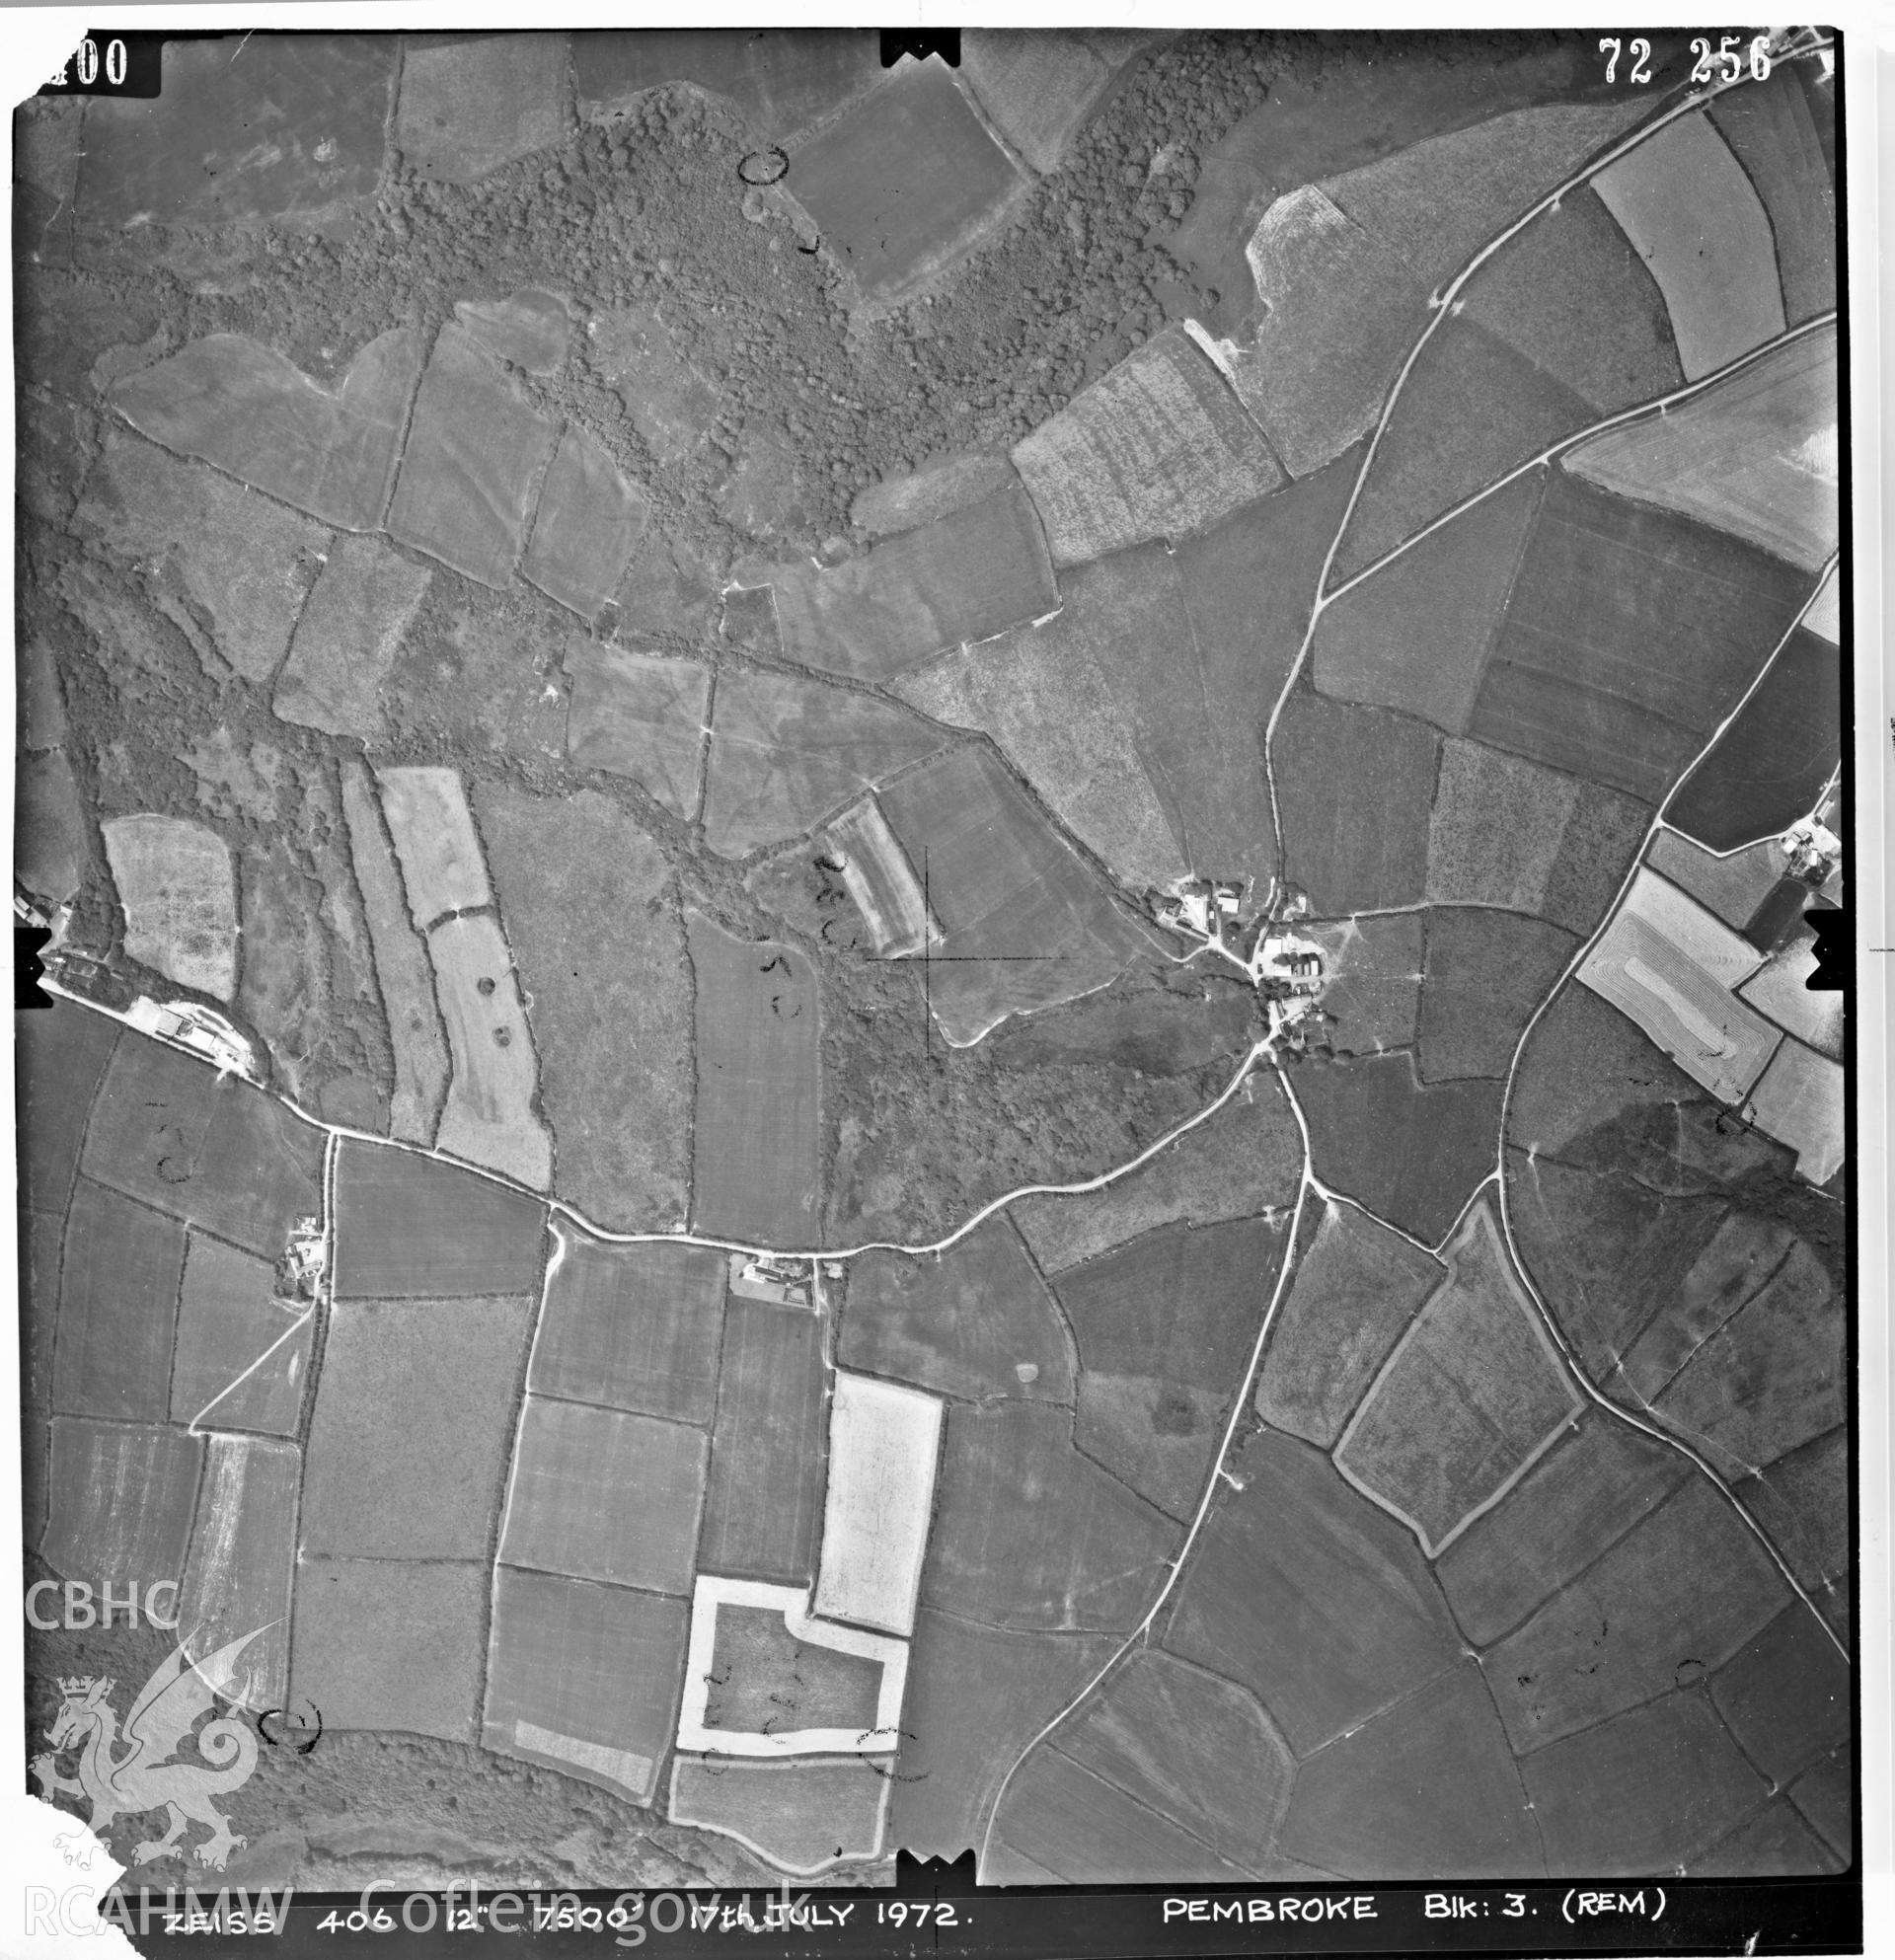 Digitized copy of an aerial photograph showing Brawdy area, taken by Ordnance Survey, 1972.